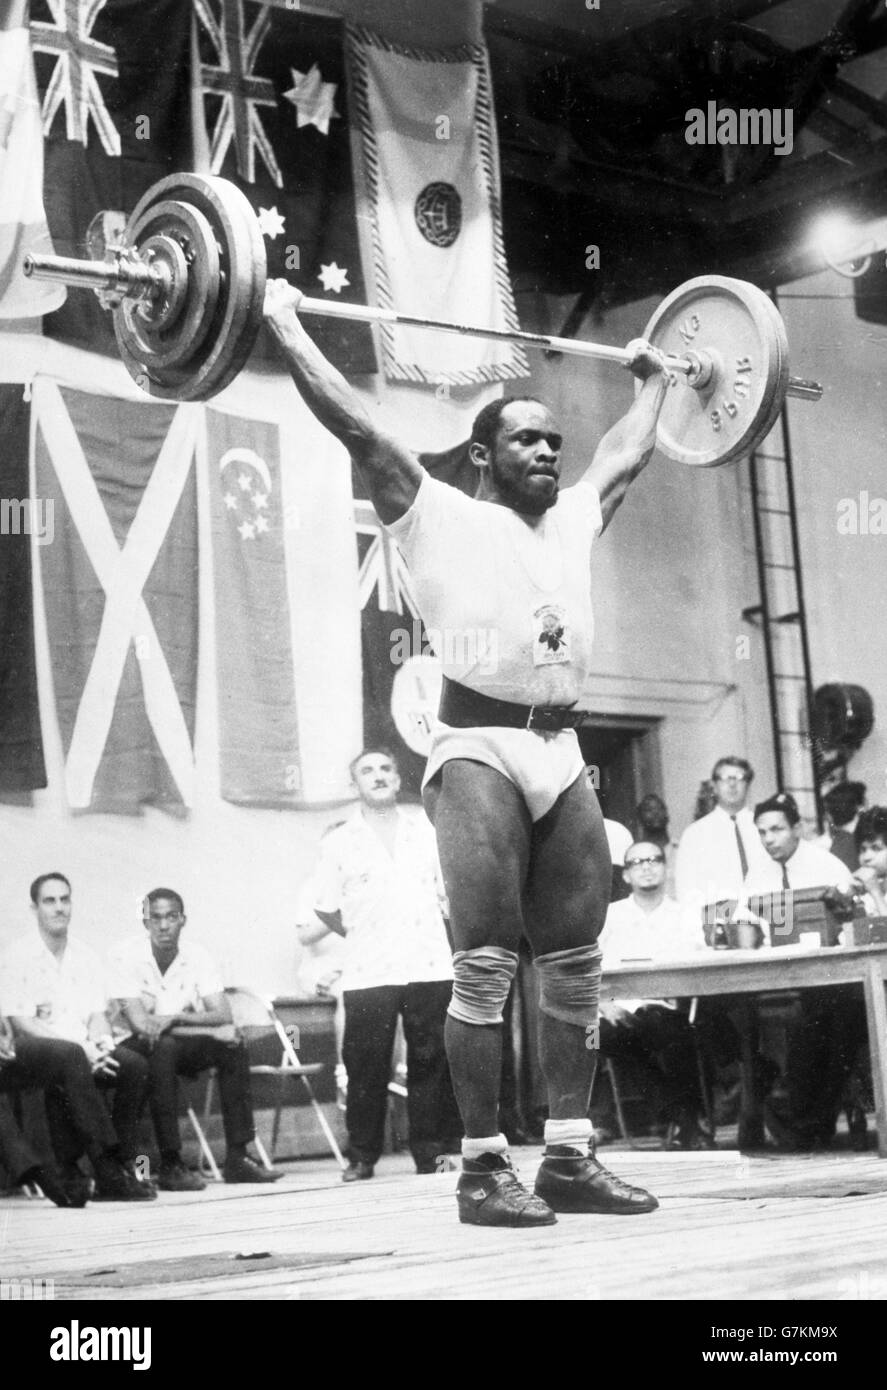 British Empire and Commonwealth Games - Weightlifting - Kingston, Jamaica Stock Photo